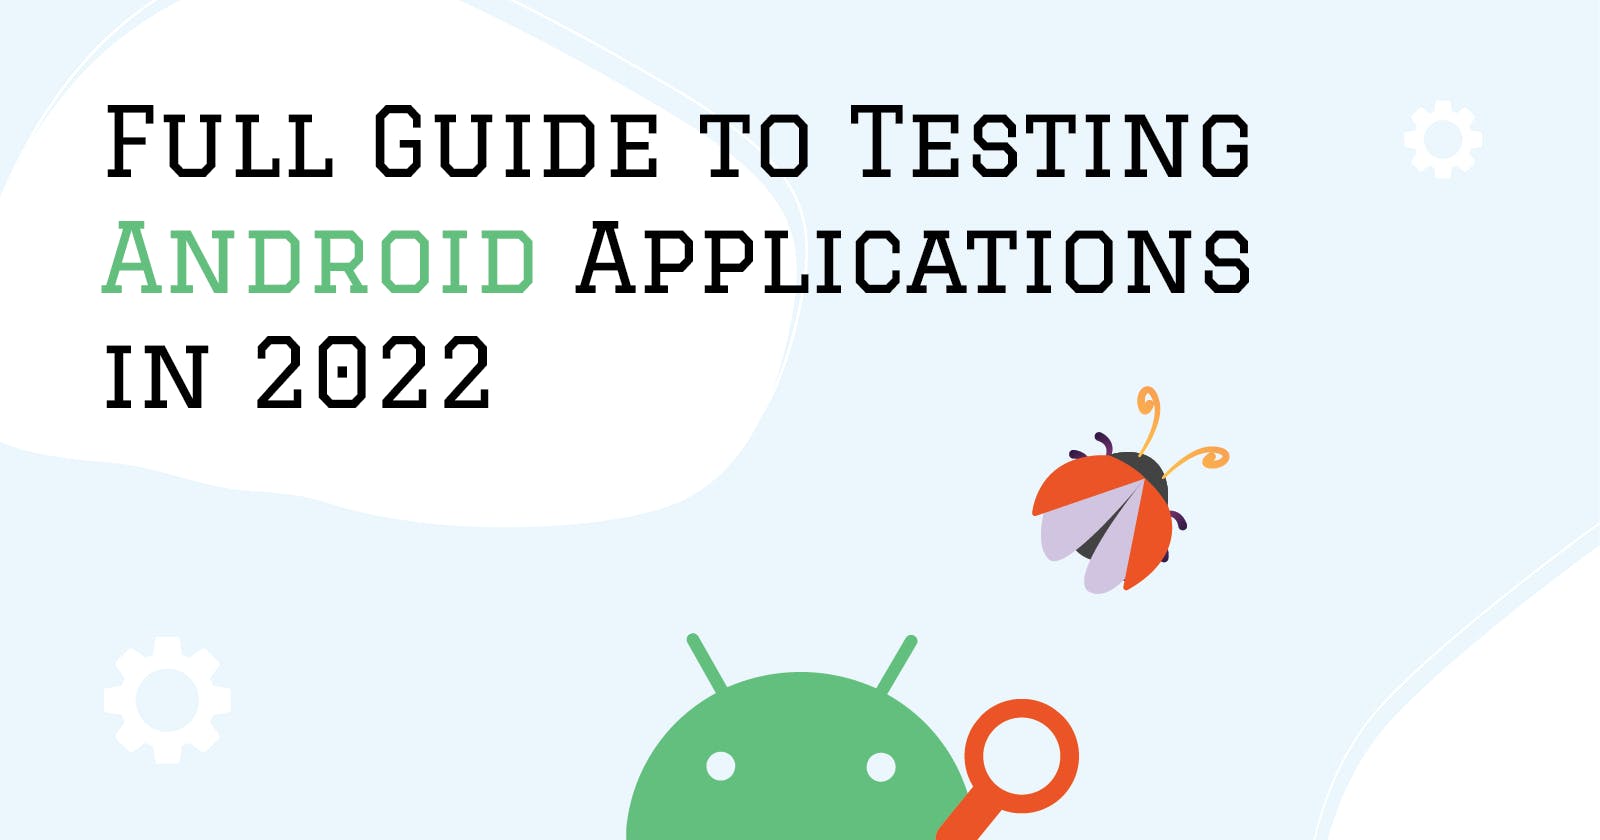 Full Guide to Testing Android Applications in 2022